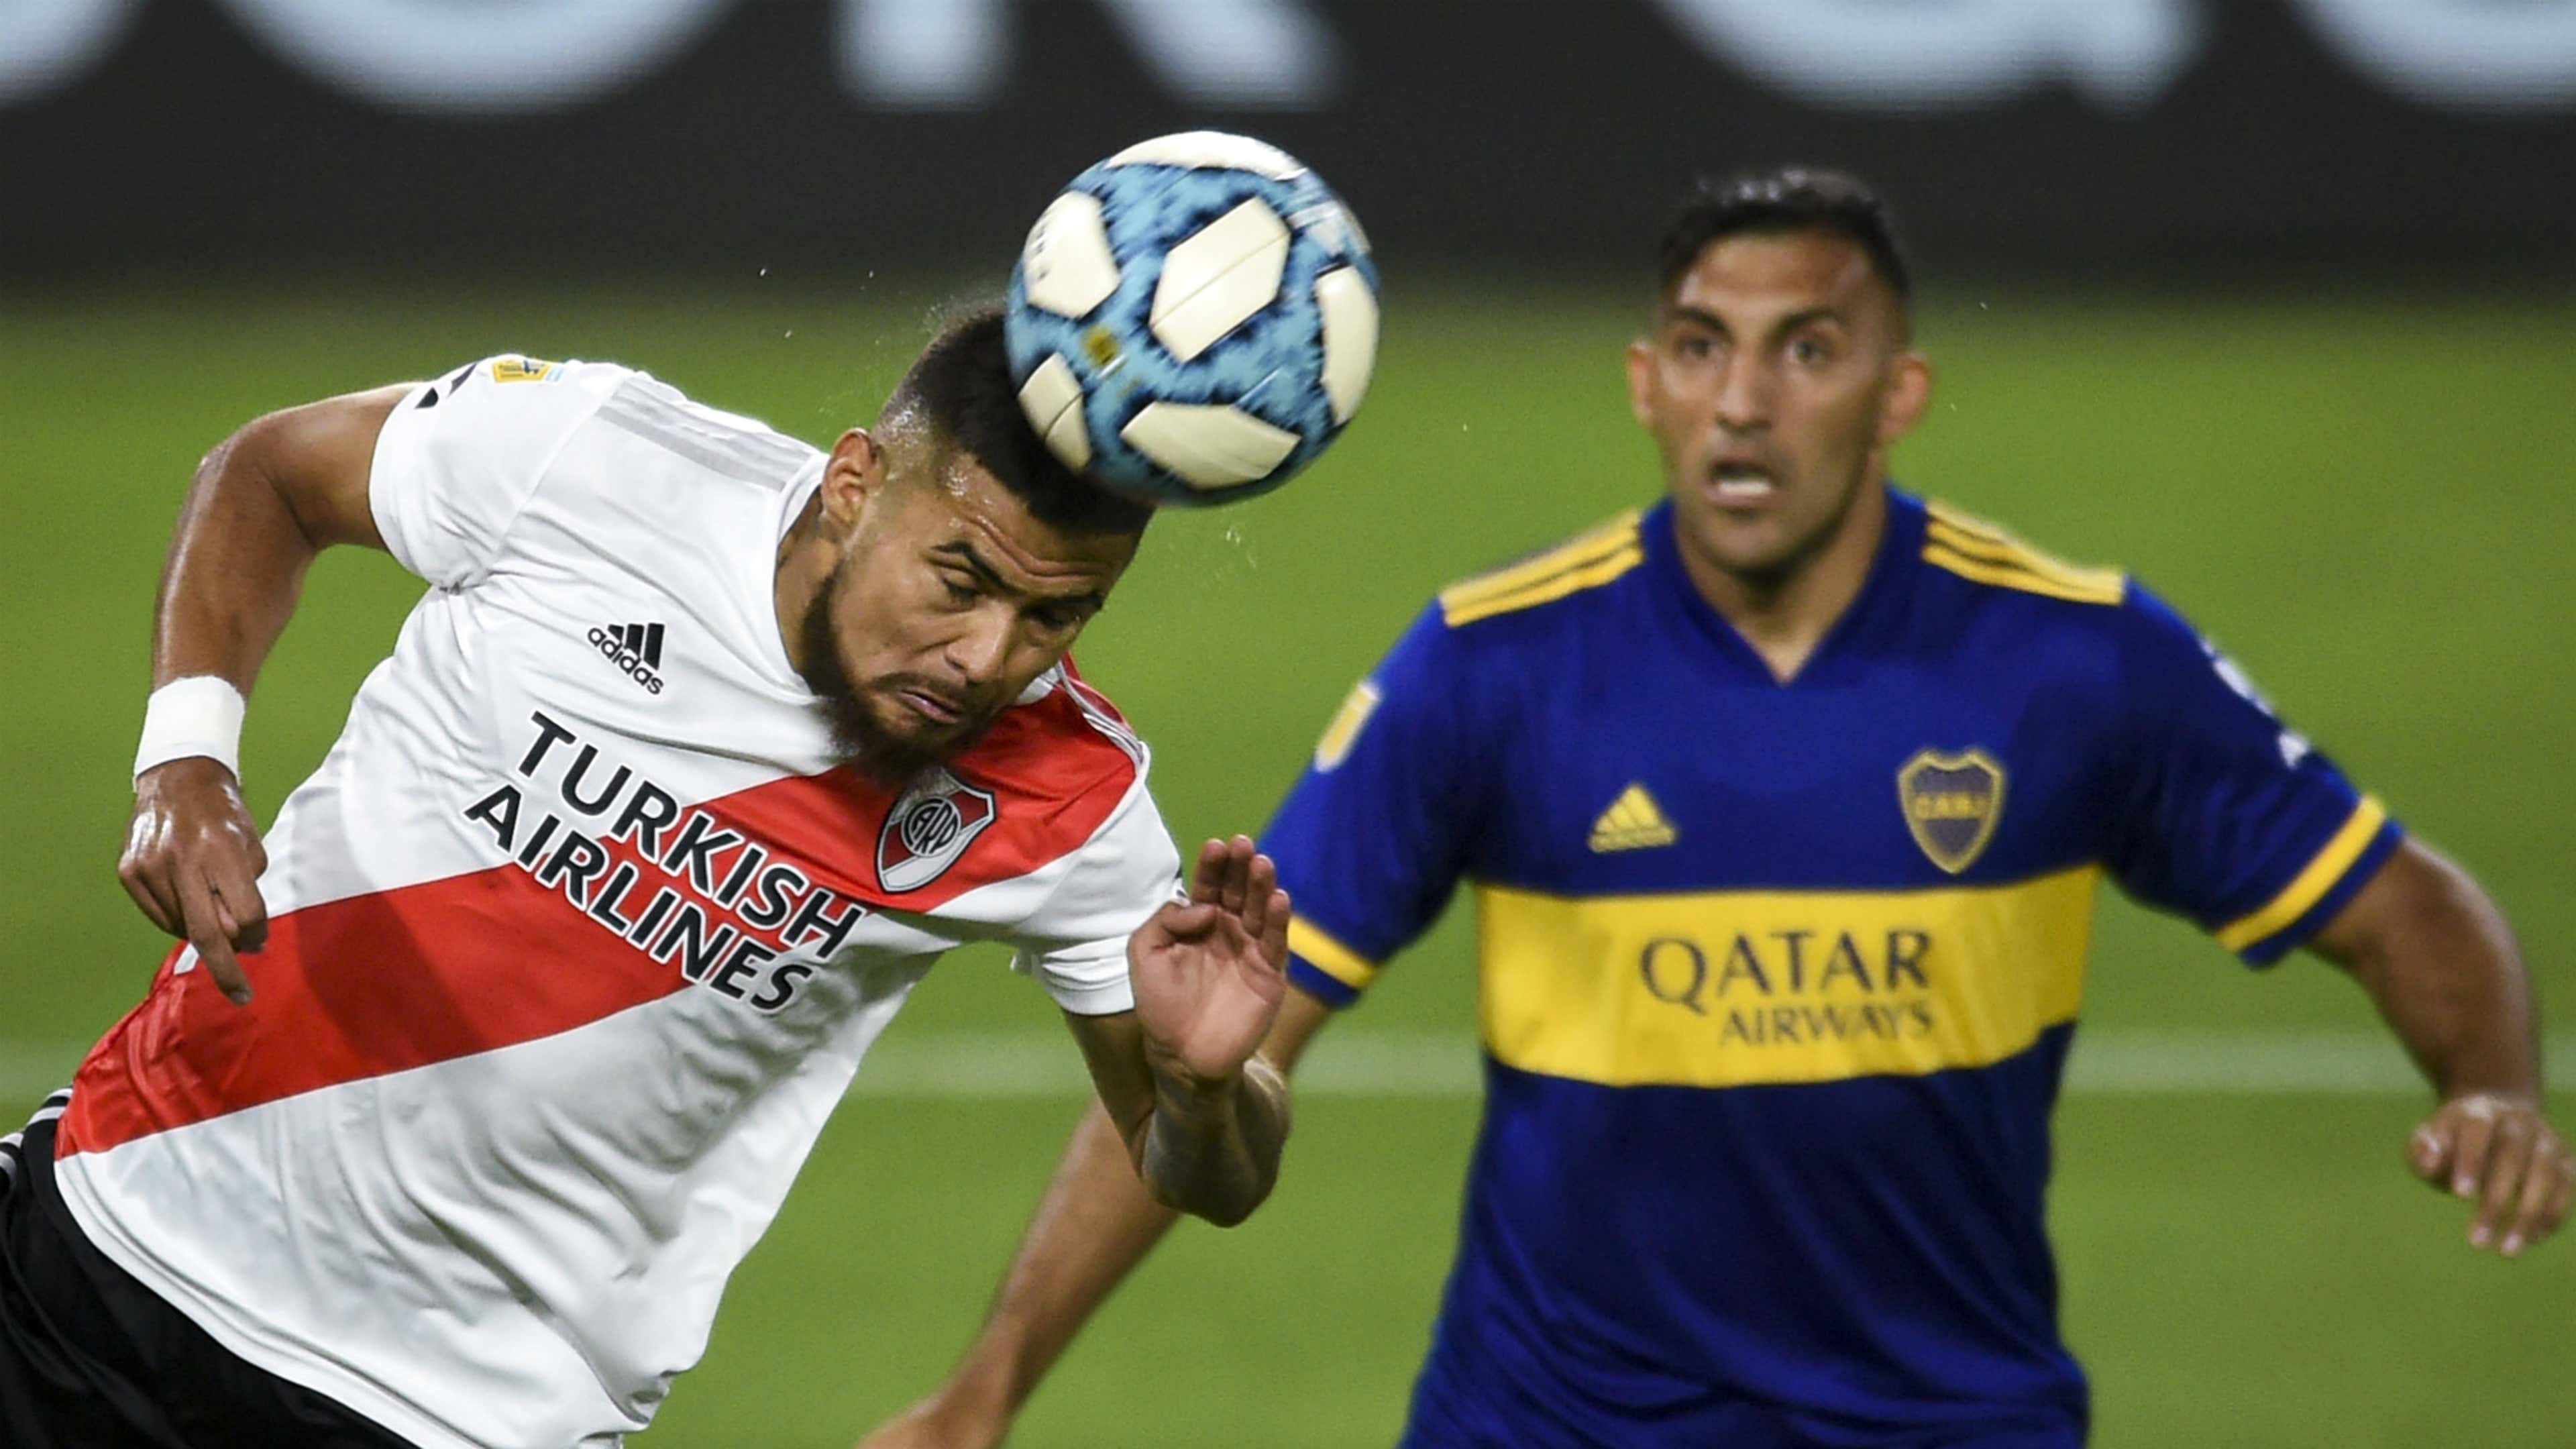 River Plate vs Racing Club: How to watch Liga Argentina matches